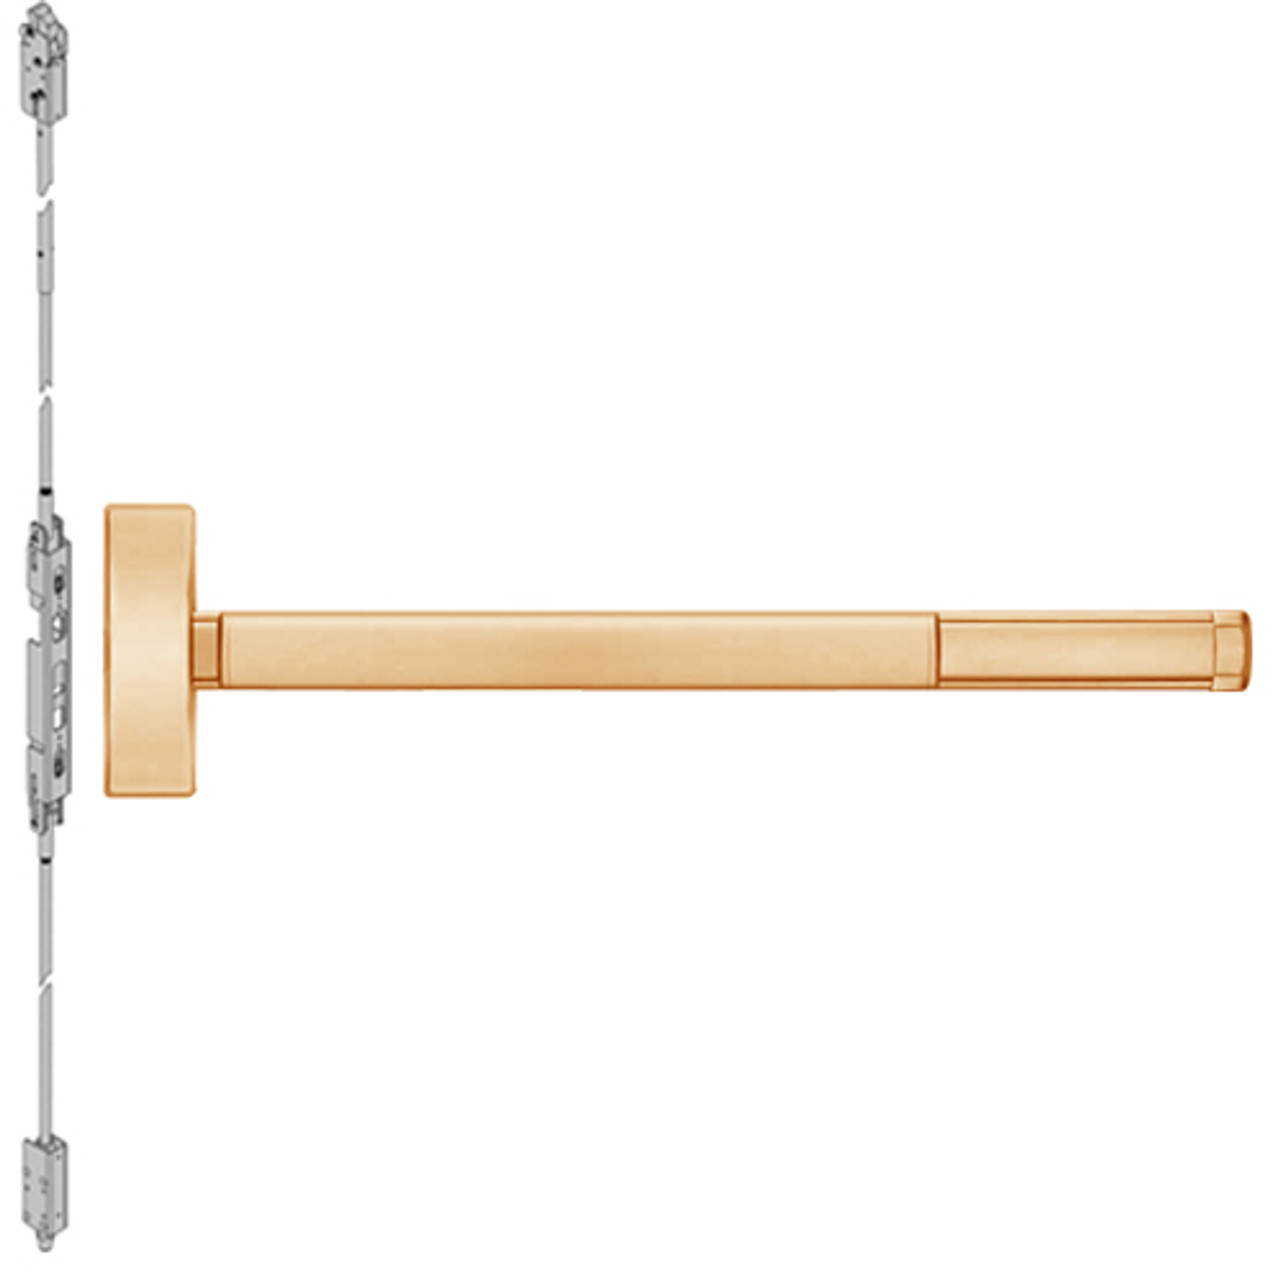 TSFL2815LBR-612-48 PHI 2800 Series Fire Rated Concealed Vertical Rod Exit Device with Touchbar Monitoring Switch Prepped for Thumbpiece Always Active in Satin Bronze Finish